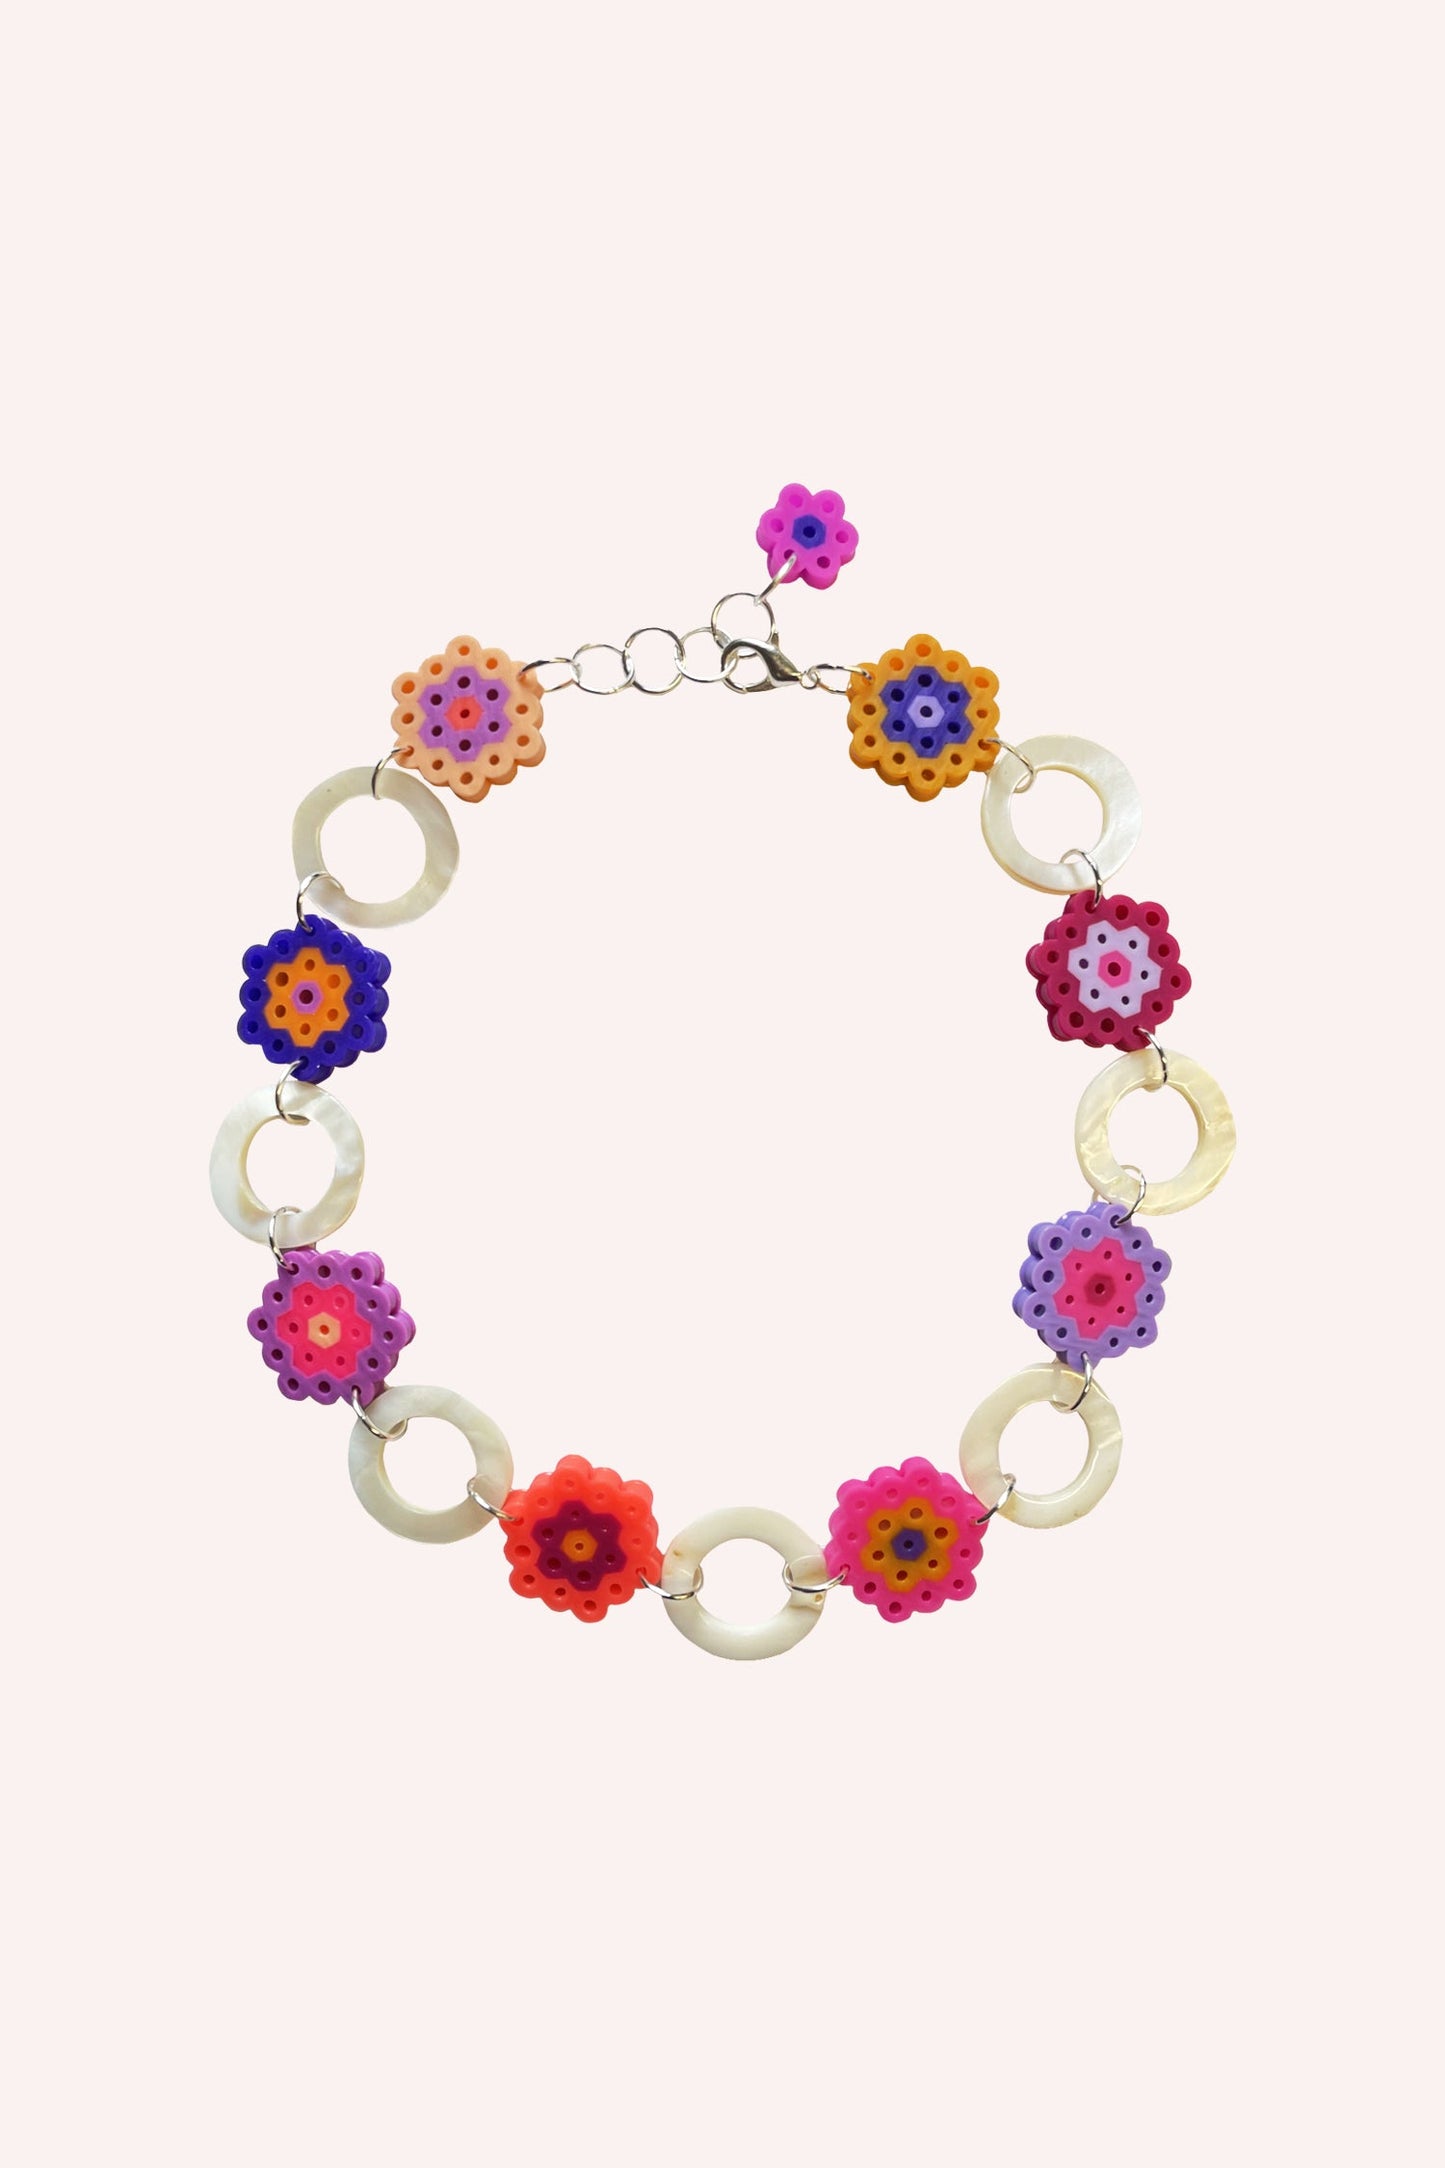 Daisy Chains Mother of Pearl, alternating crowns, and hexagonal flower shapes in multiple colors